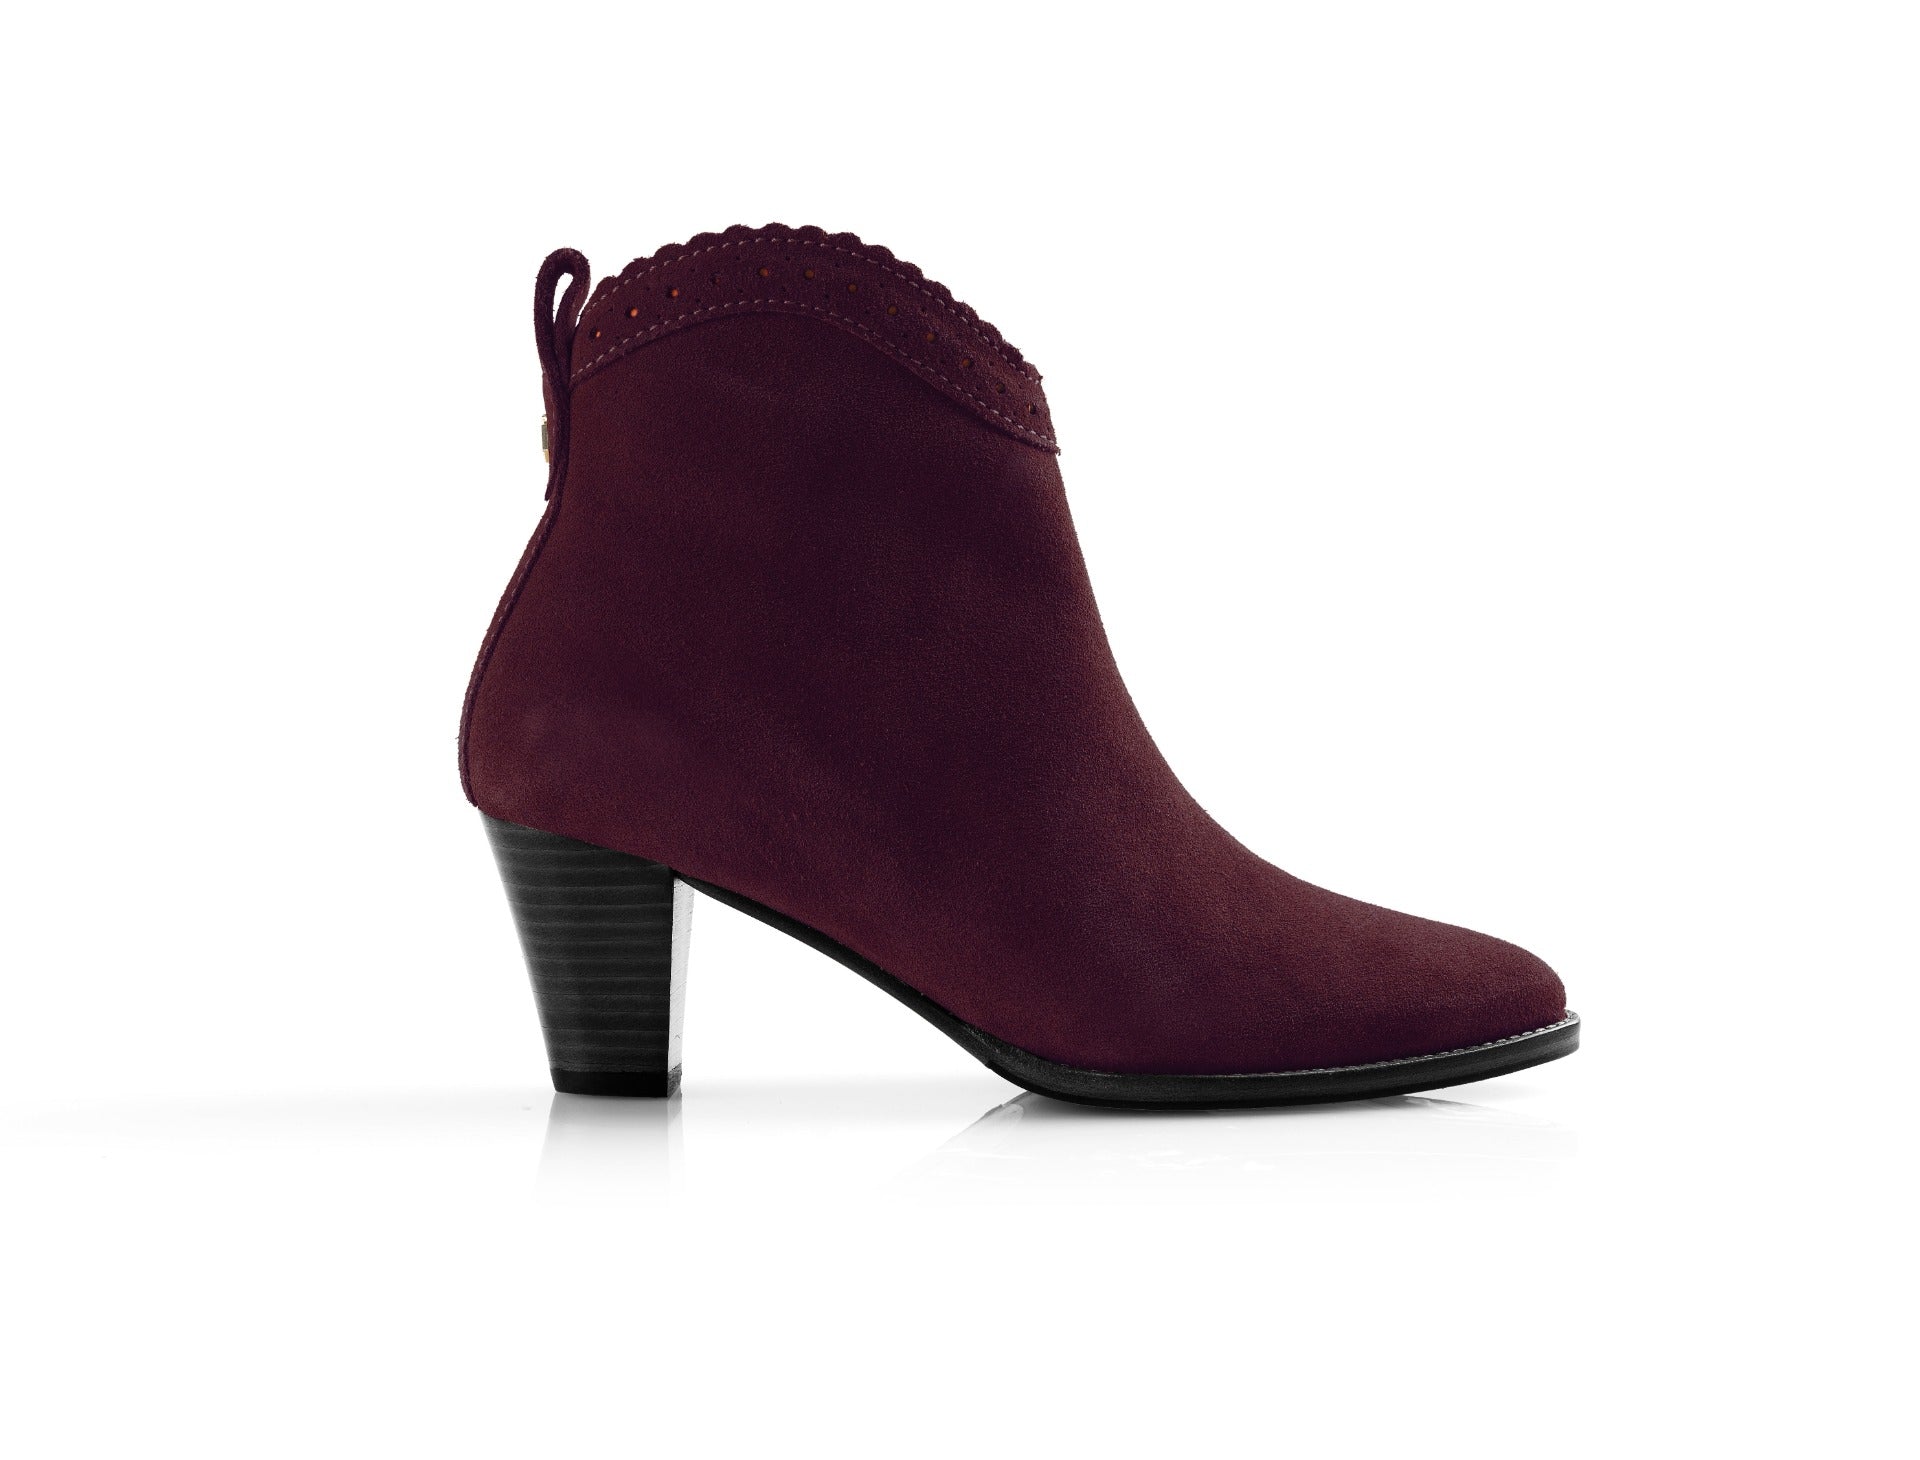 Sporting Fit Heeled Regina in Plum suede - Out and About